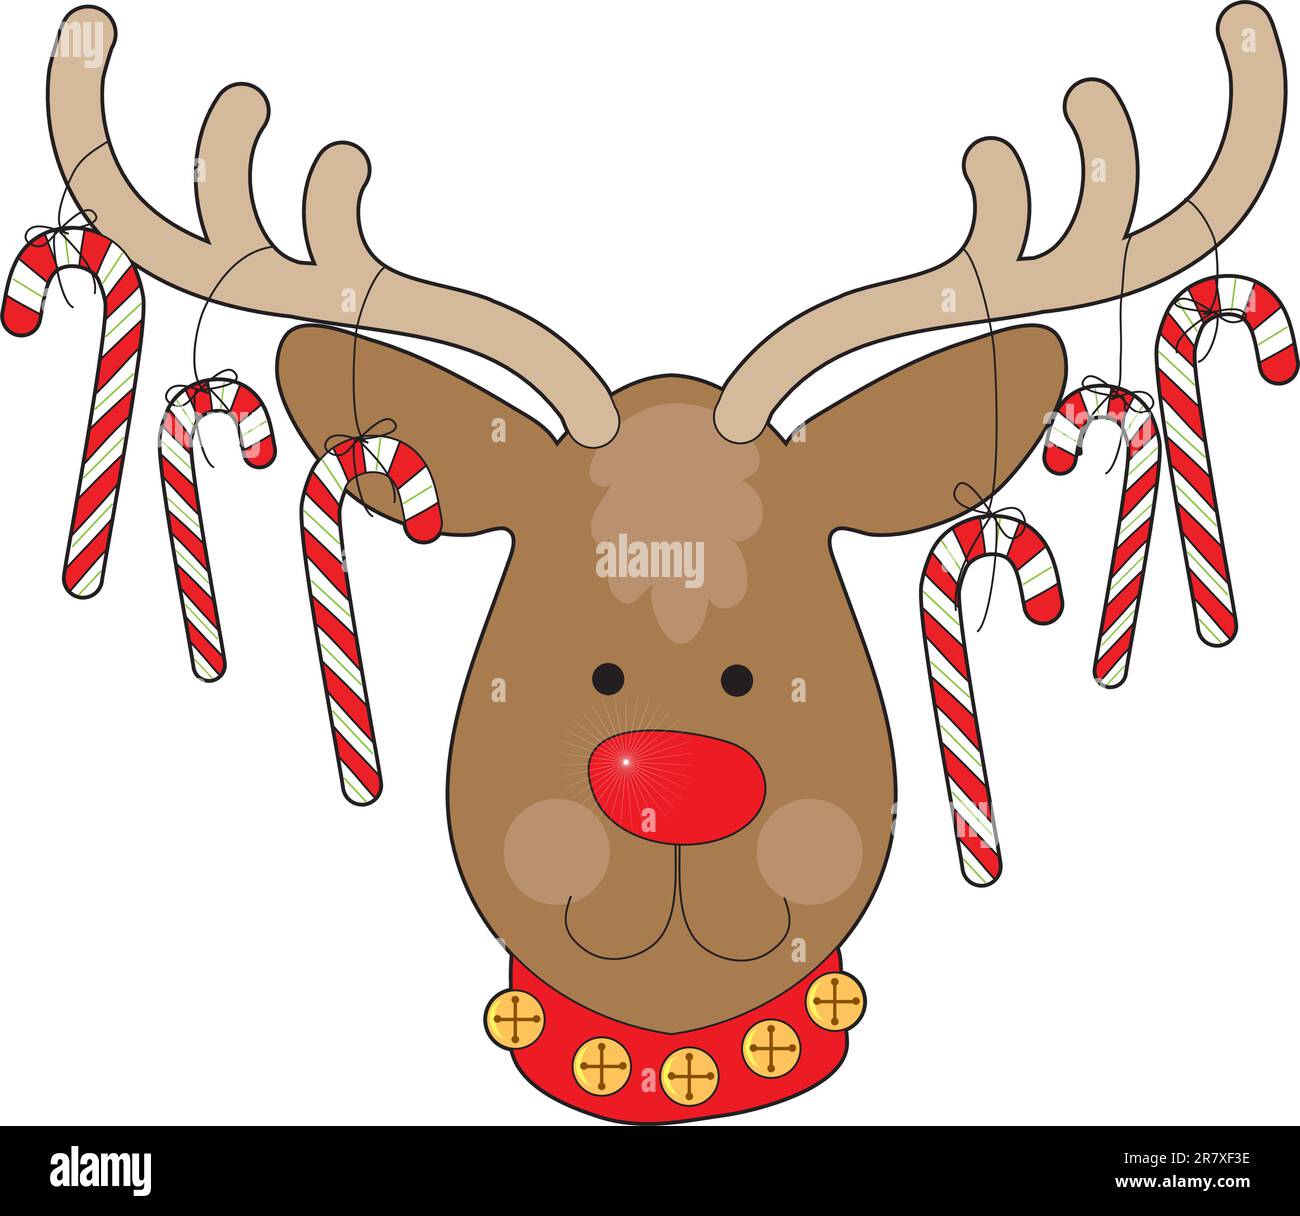 A smiling reindeer with a red nose and a red collar, has candy canes hanging from his antlers. Stock Vector